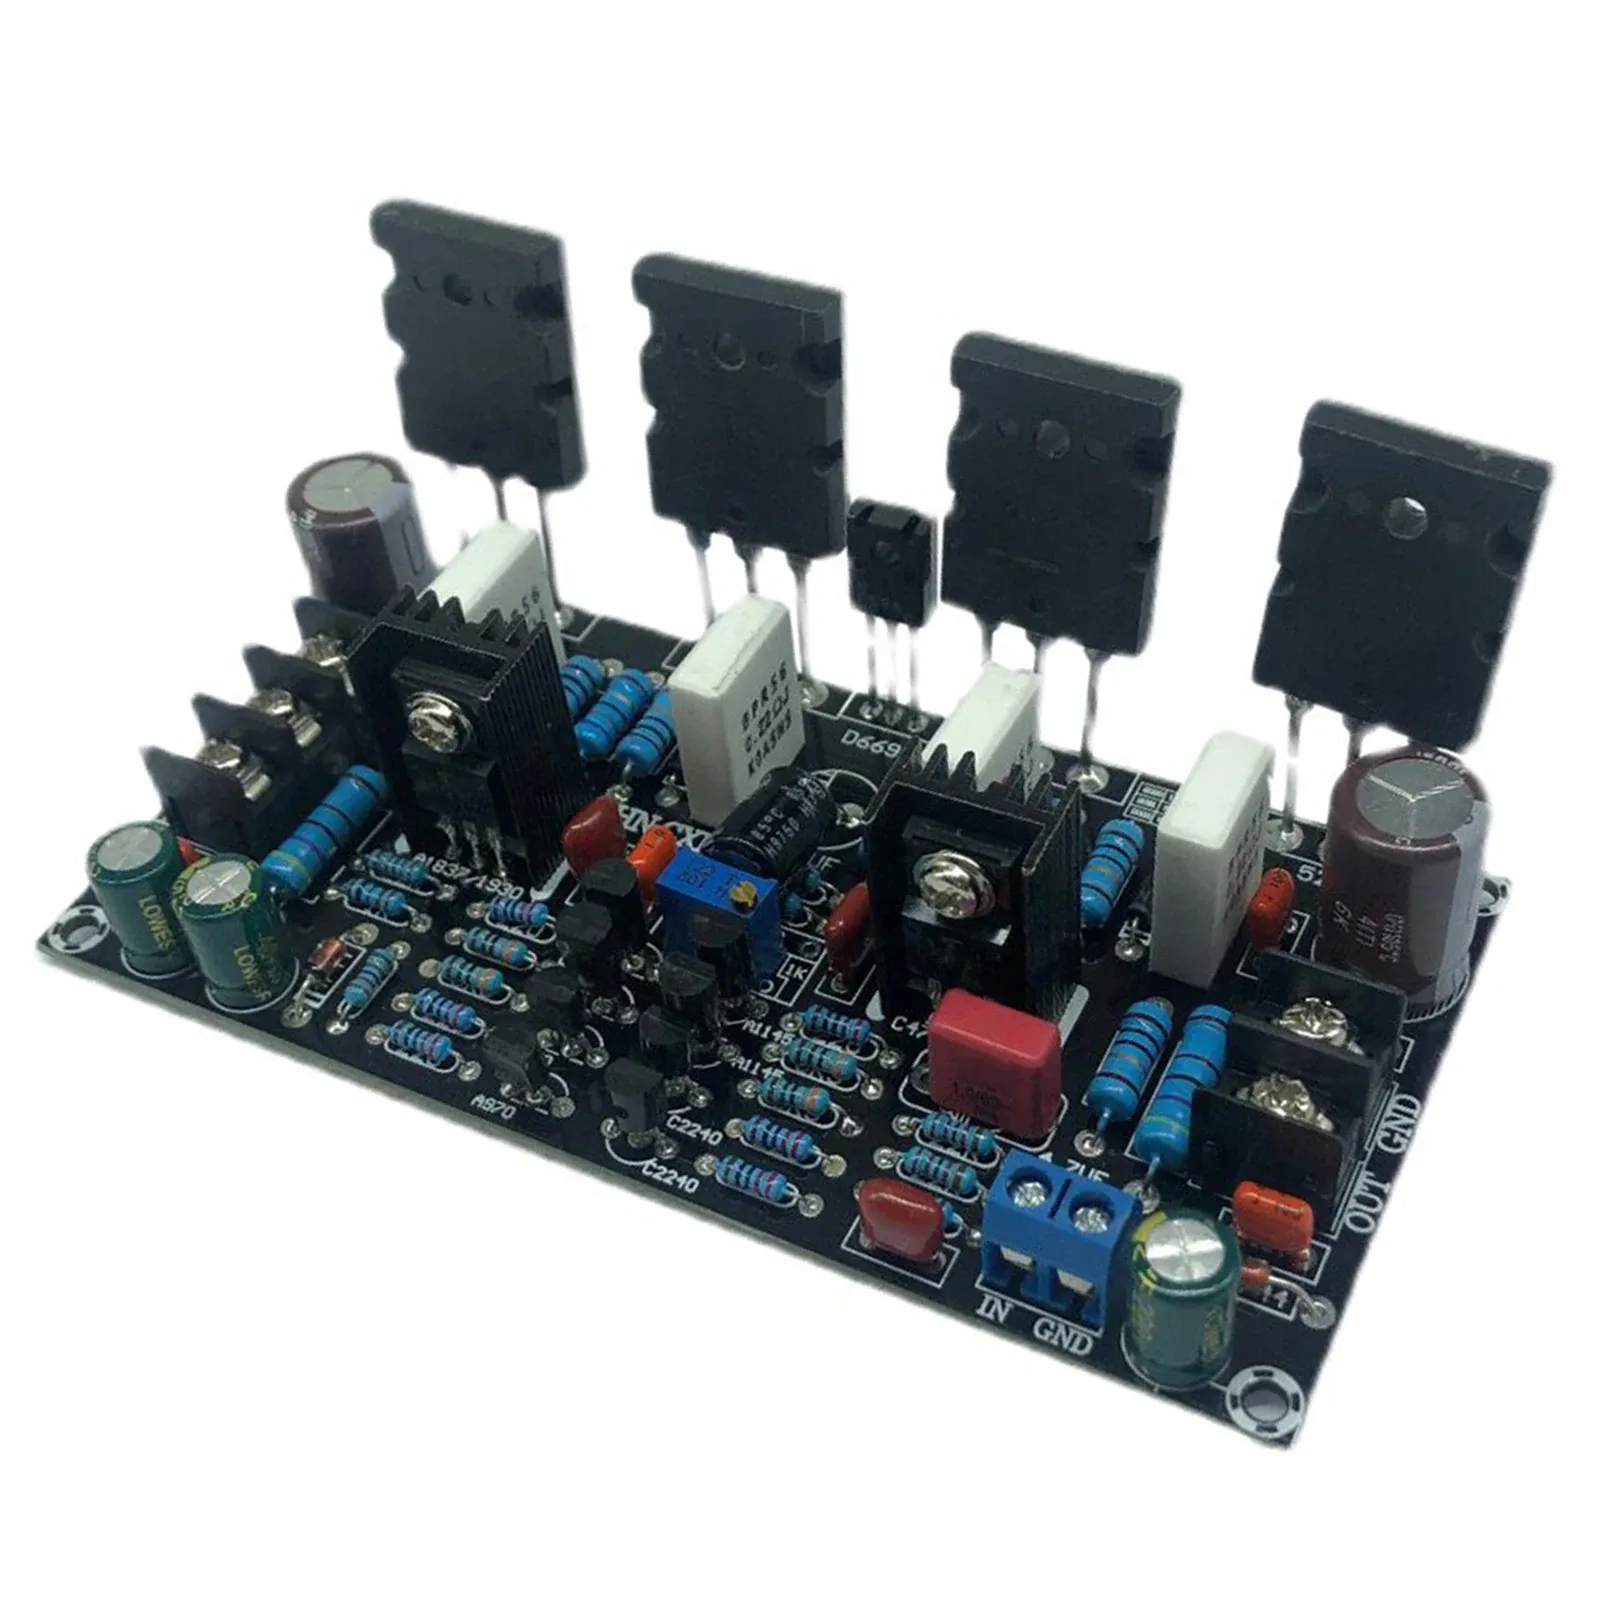 Household 200W Mono Power Amplifier Board Module, 5200/1943 PCB Board after Tube amp, for Machine Equipment